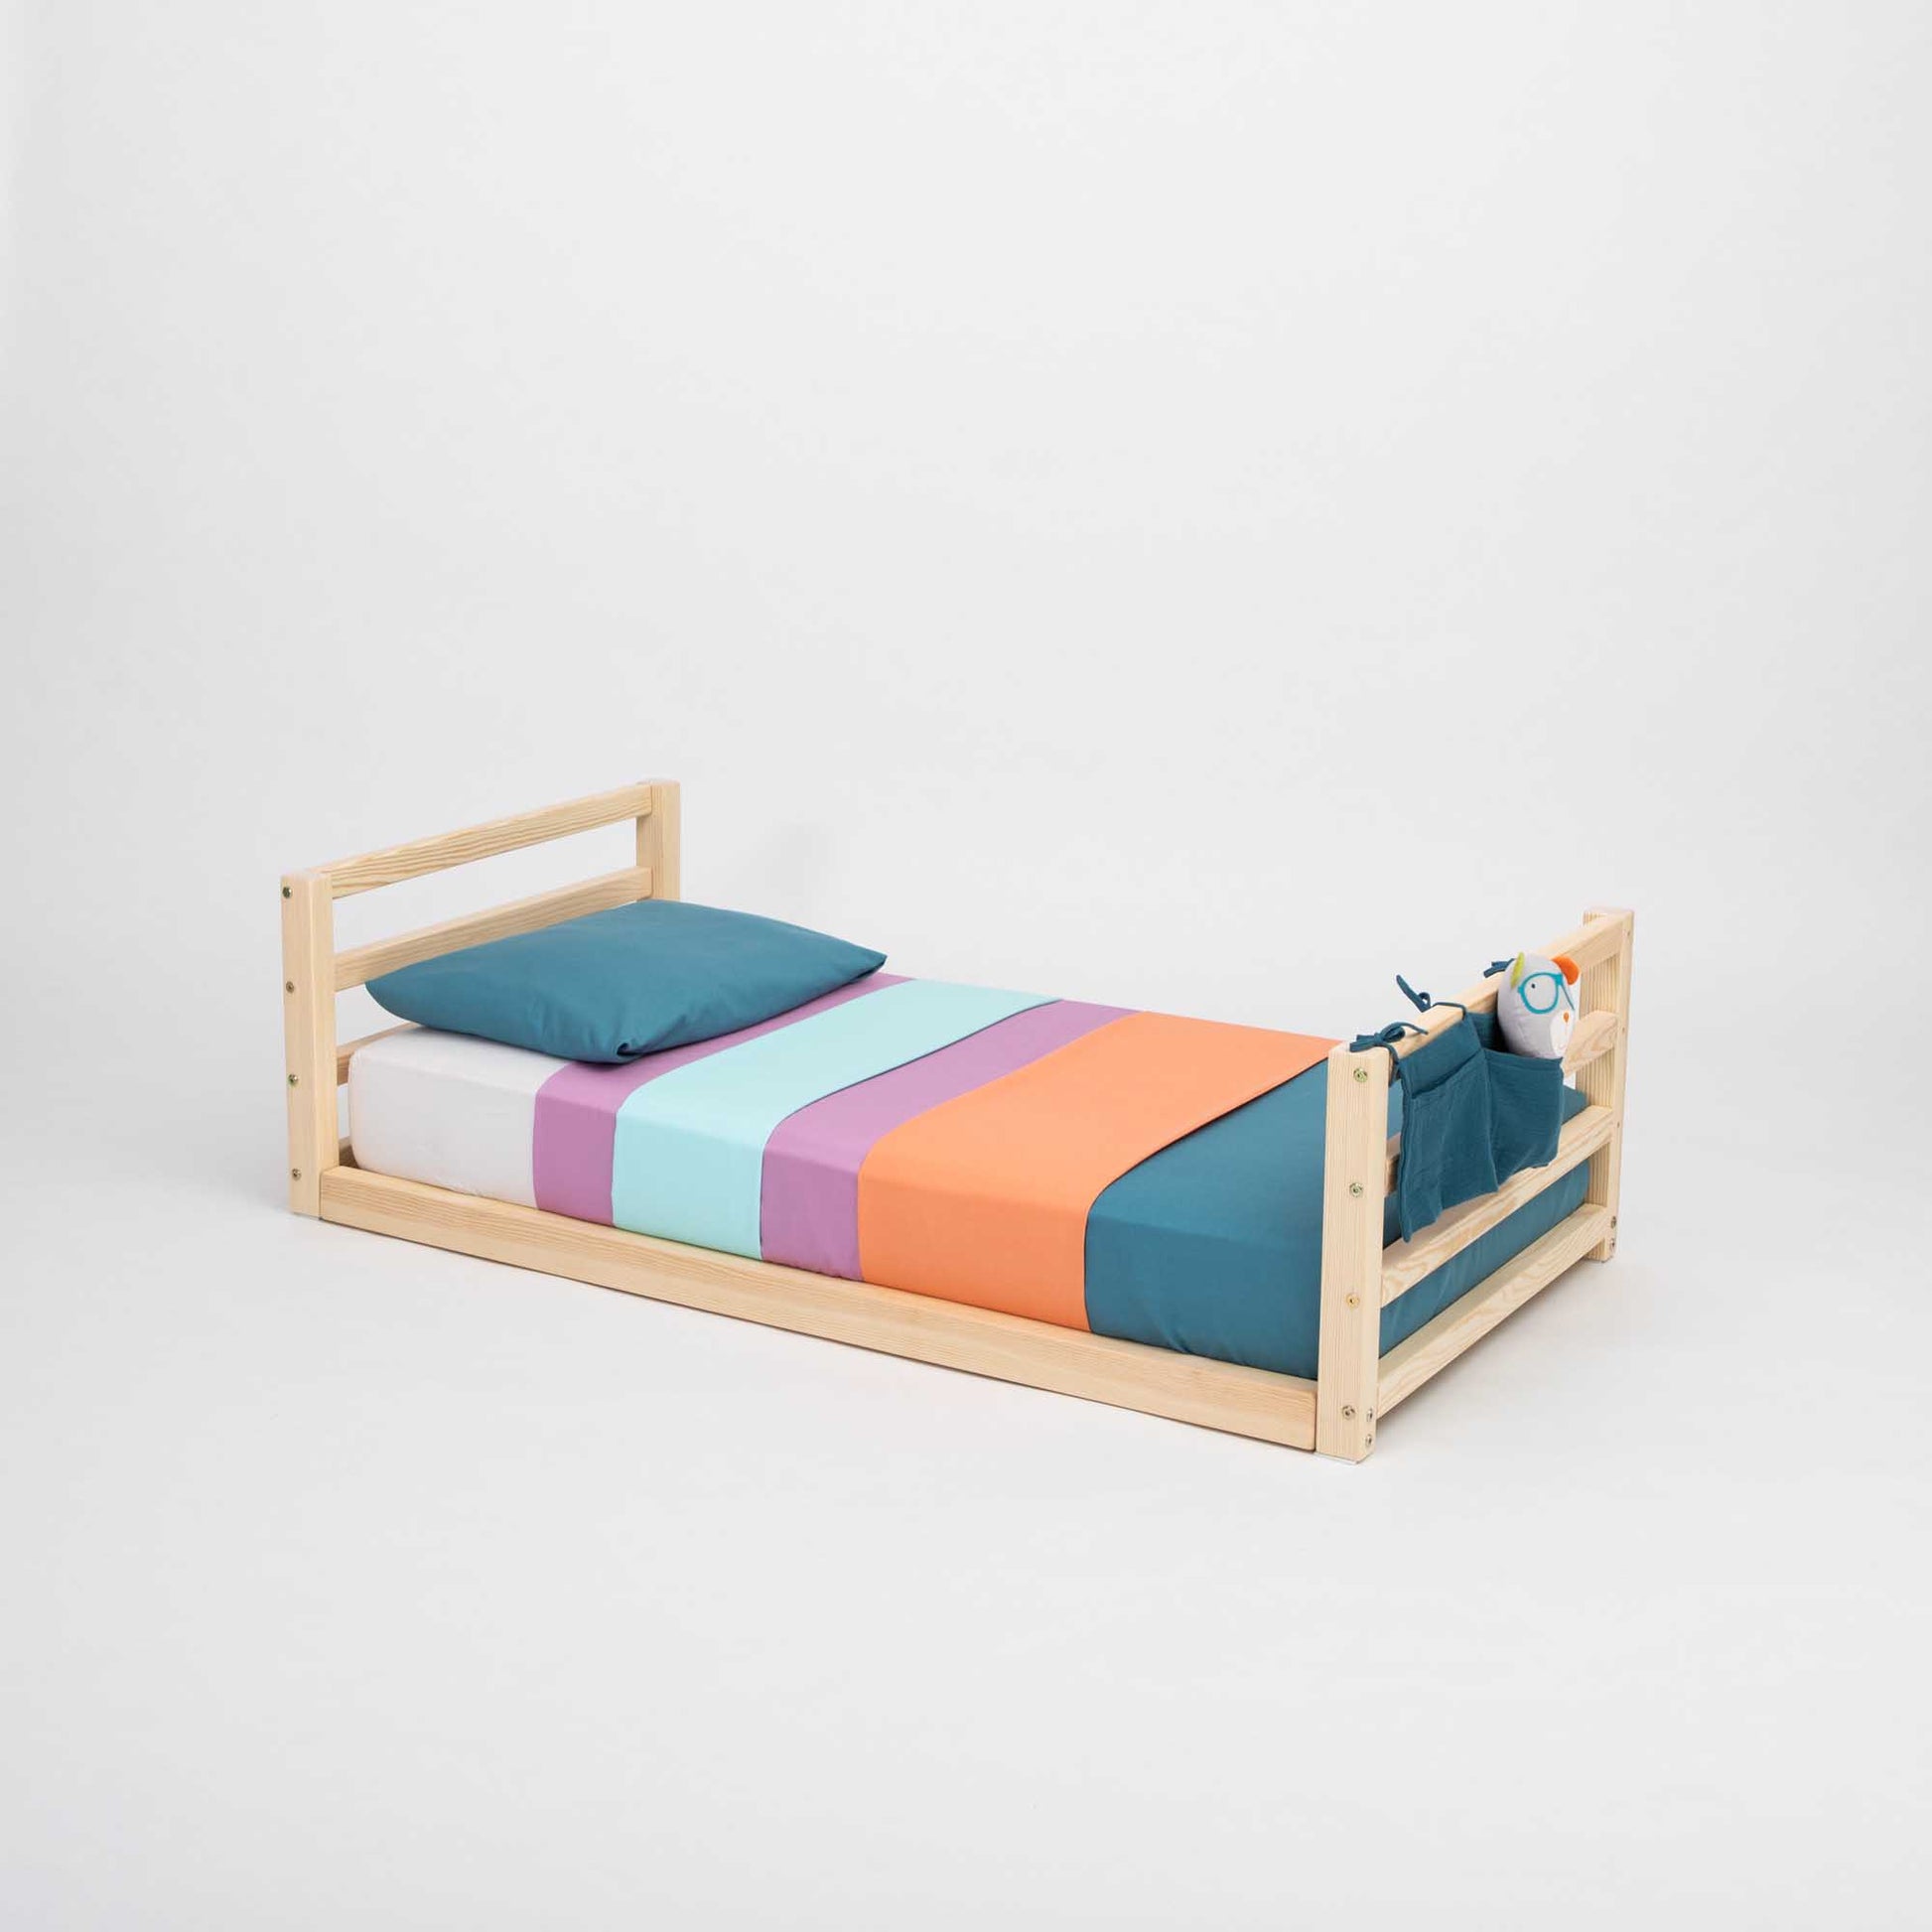 A long-lasting 2-in-1 kids' bed with a horizontal rail headboard and footboard, featuring colorful sheets and a wooden frame, from Sweet Home From Wood.